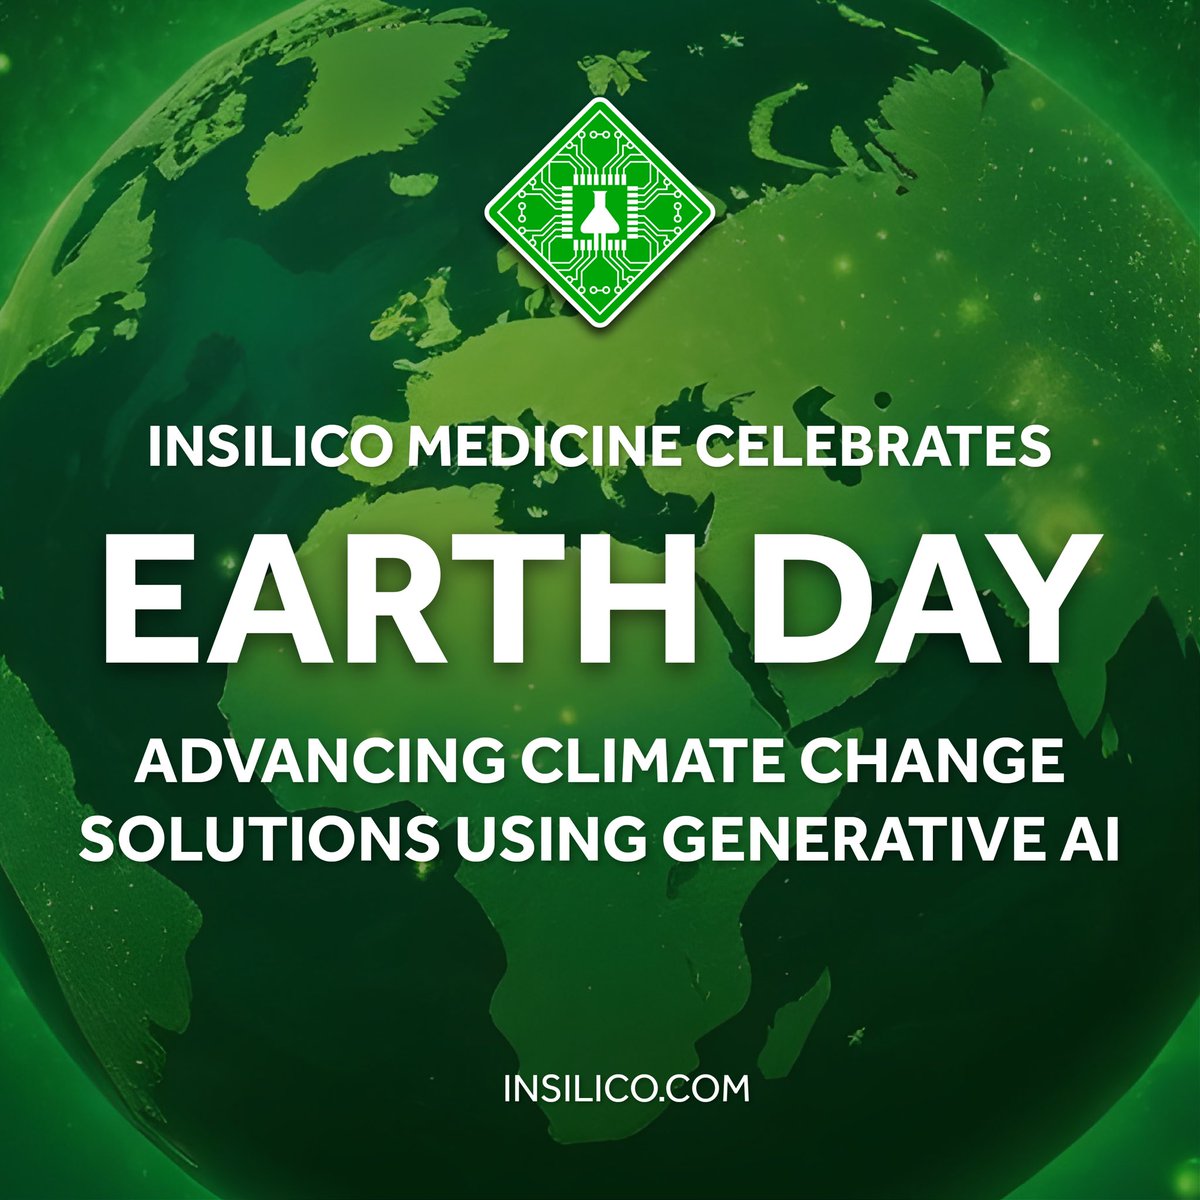 We're celebrating #EarthDay today and every day by advancing new solutions to pressing climate change problems using #genAI.